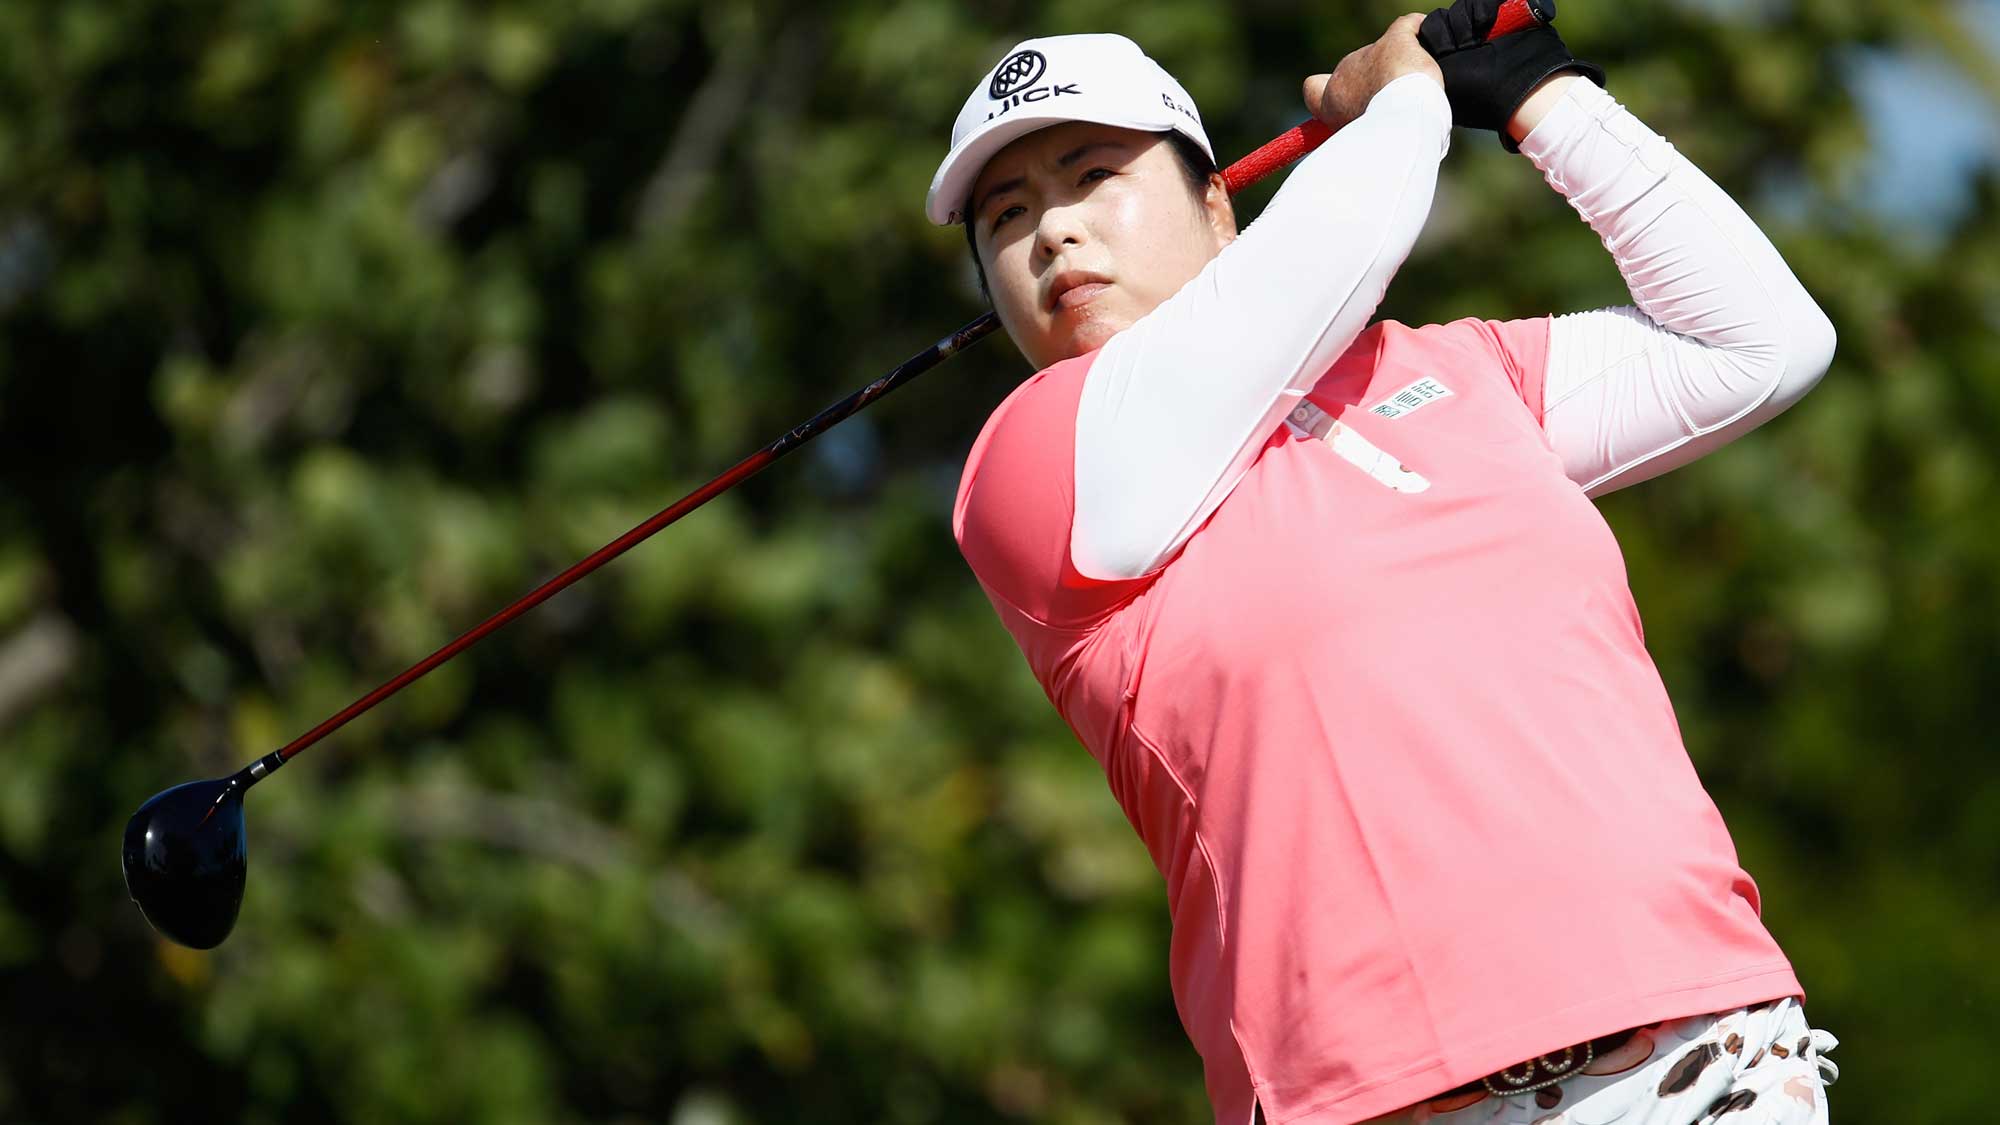 Shanshan Feng of China hits her tee shot on the 4th hole during the final round of the Pure Silk Bahamas LPGA Classic